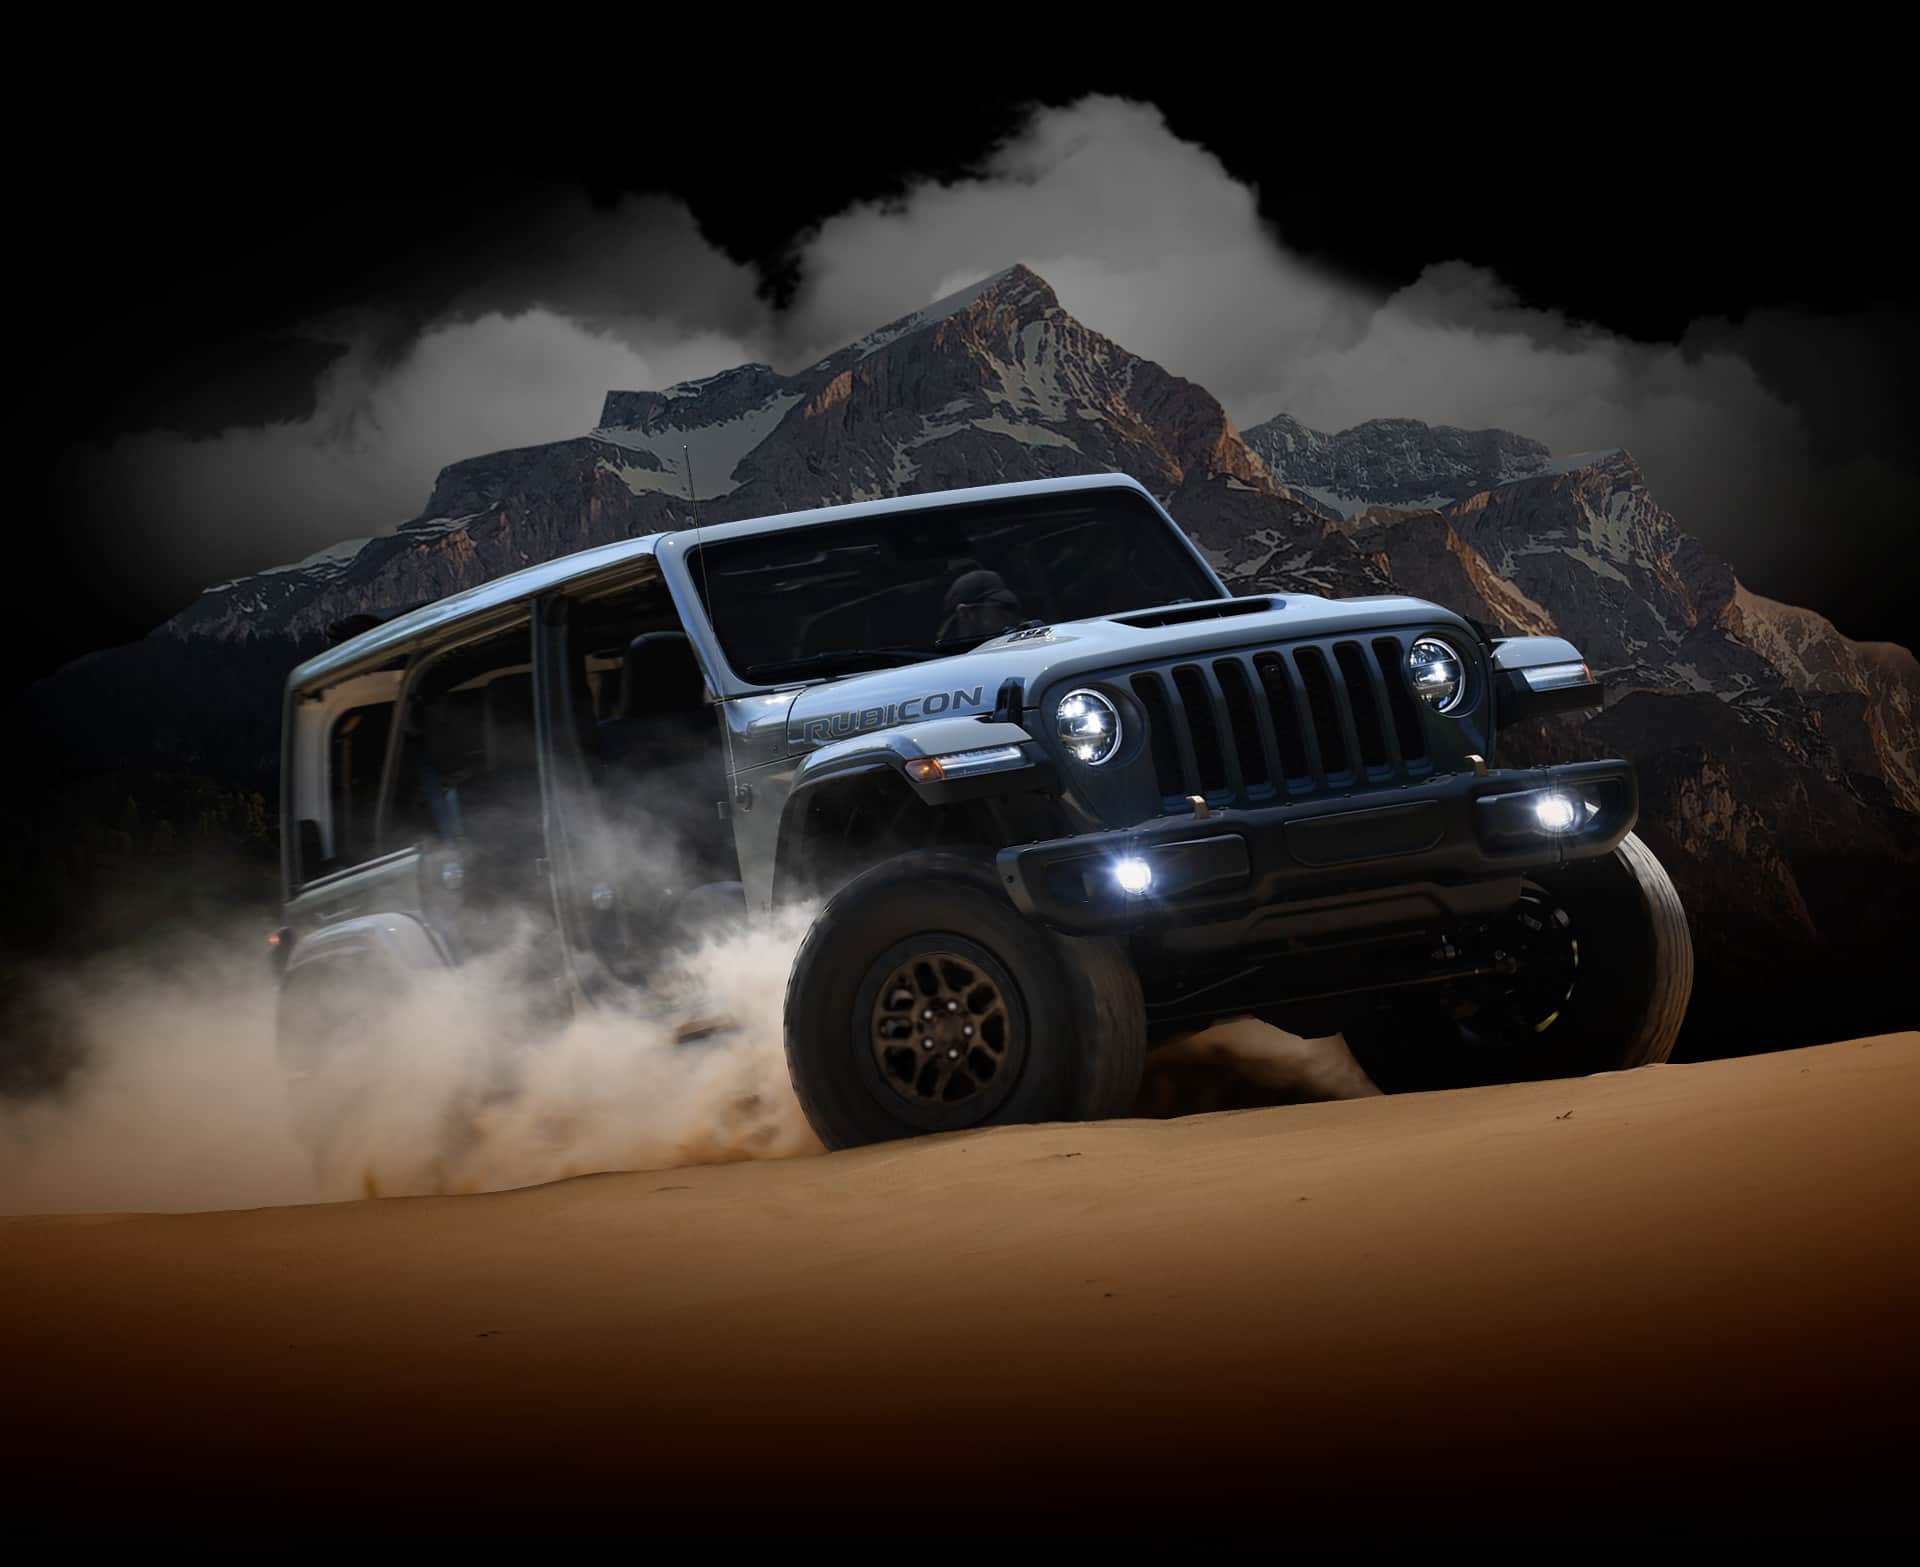 The 2022 Jeep Wrangler Rubicon 392 with its doors off and outfitted with the Xtreme Recon Package, straddling a split in a rock.